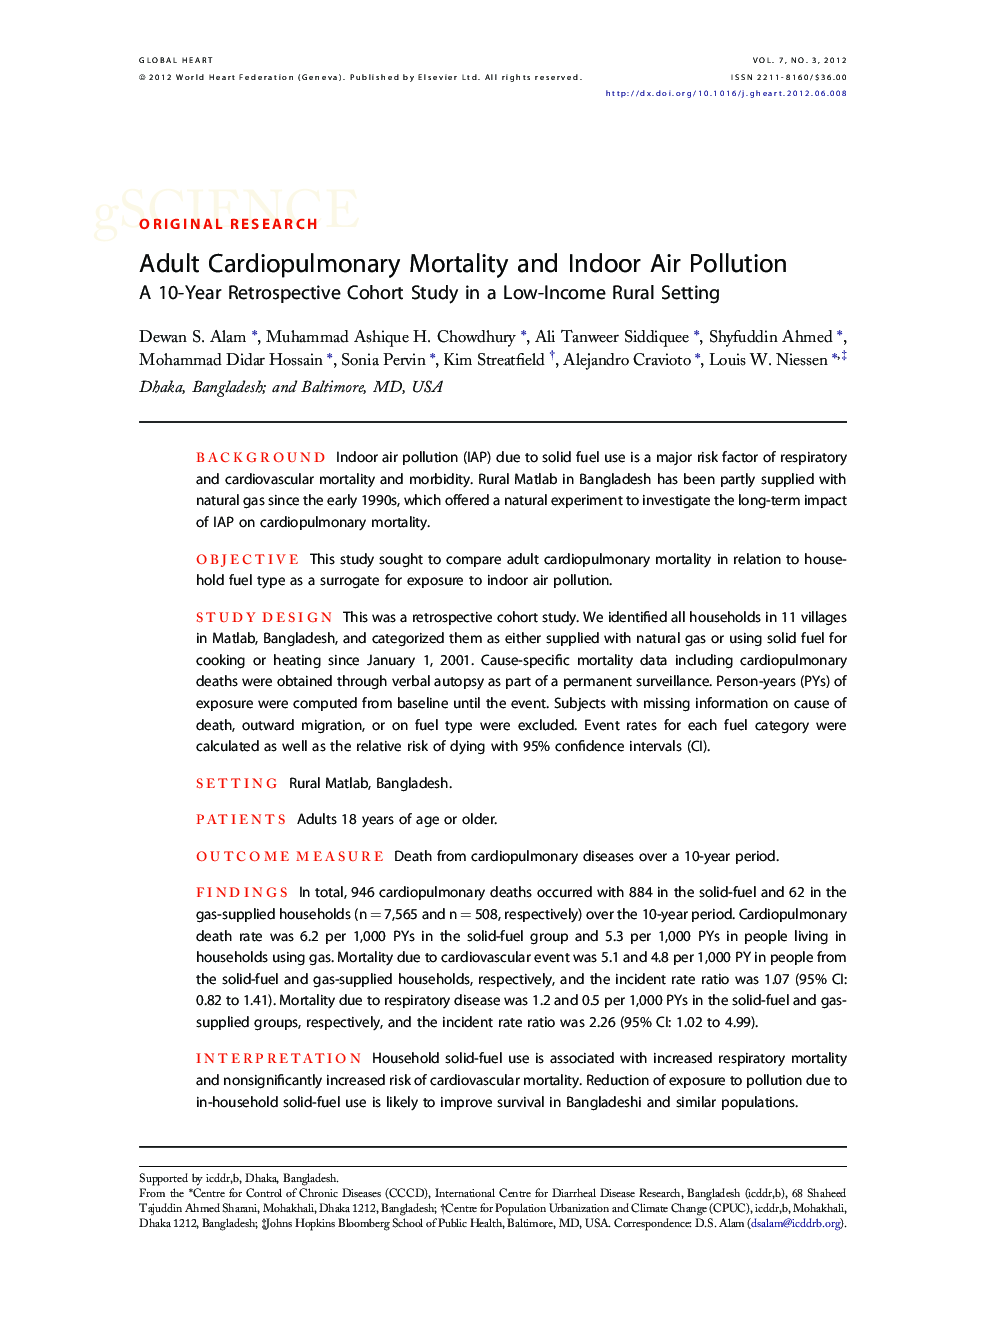 Adult Cardiopulmonary Mortality and Indoor Air Pollution: AÂ 10-Year Retrospective Cohort Study in a Low-Income RuralÂ Setting